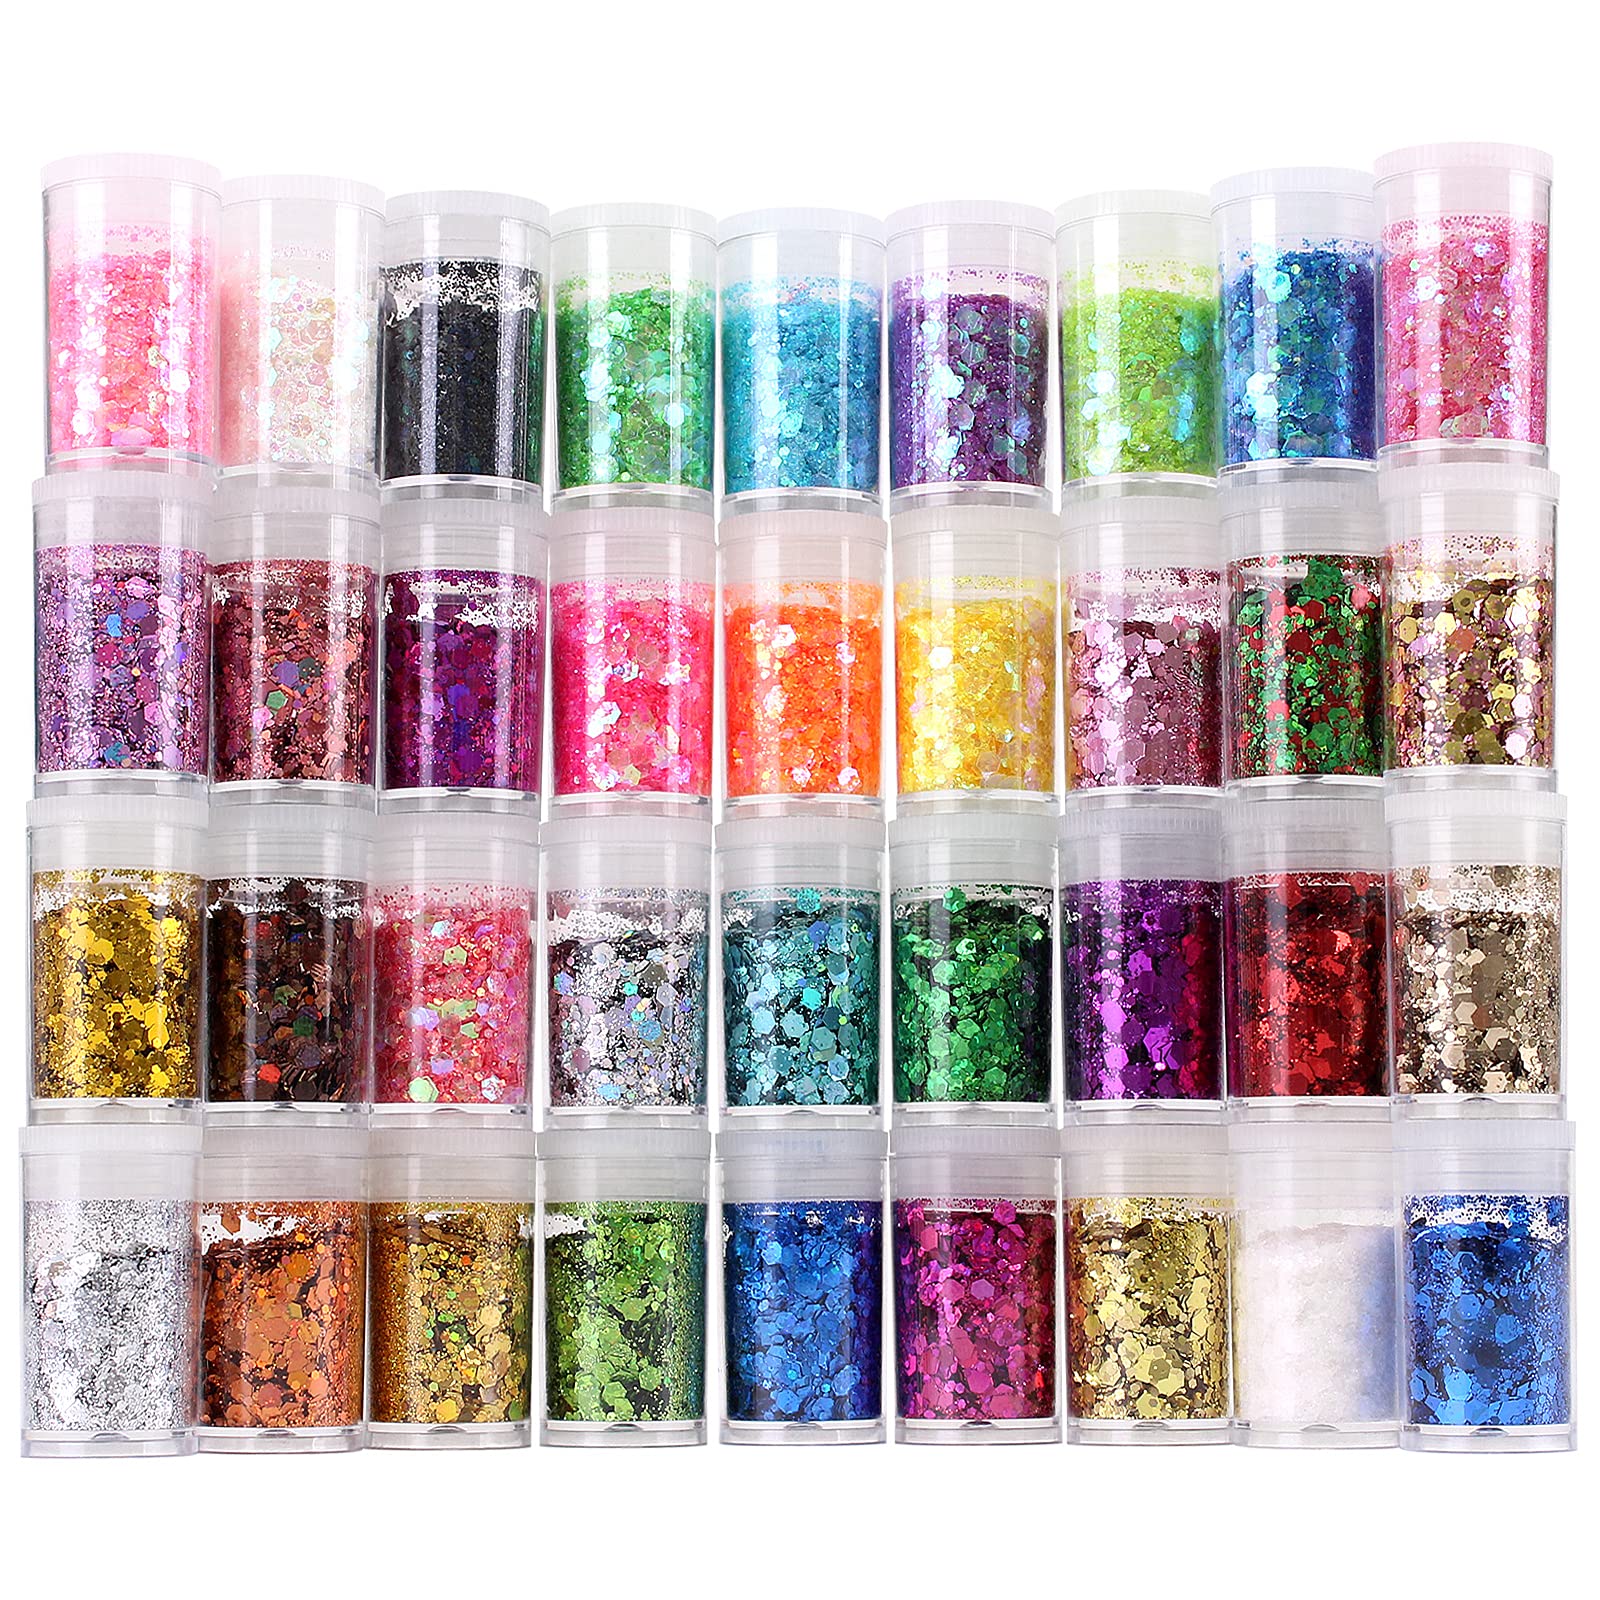 Cosmetic Grade Glitter, 150g Holographic Glitter for Nail Eye Face Body  Hair, Multi Purpose Metallic Fine Glitters for Body Makeup, Halloween  Holiday